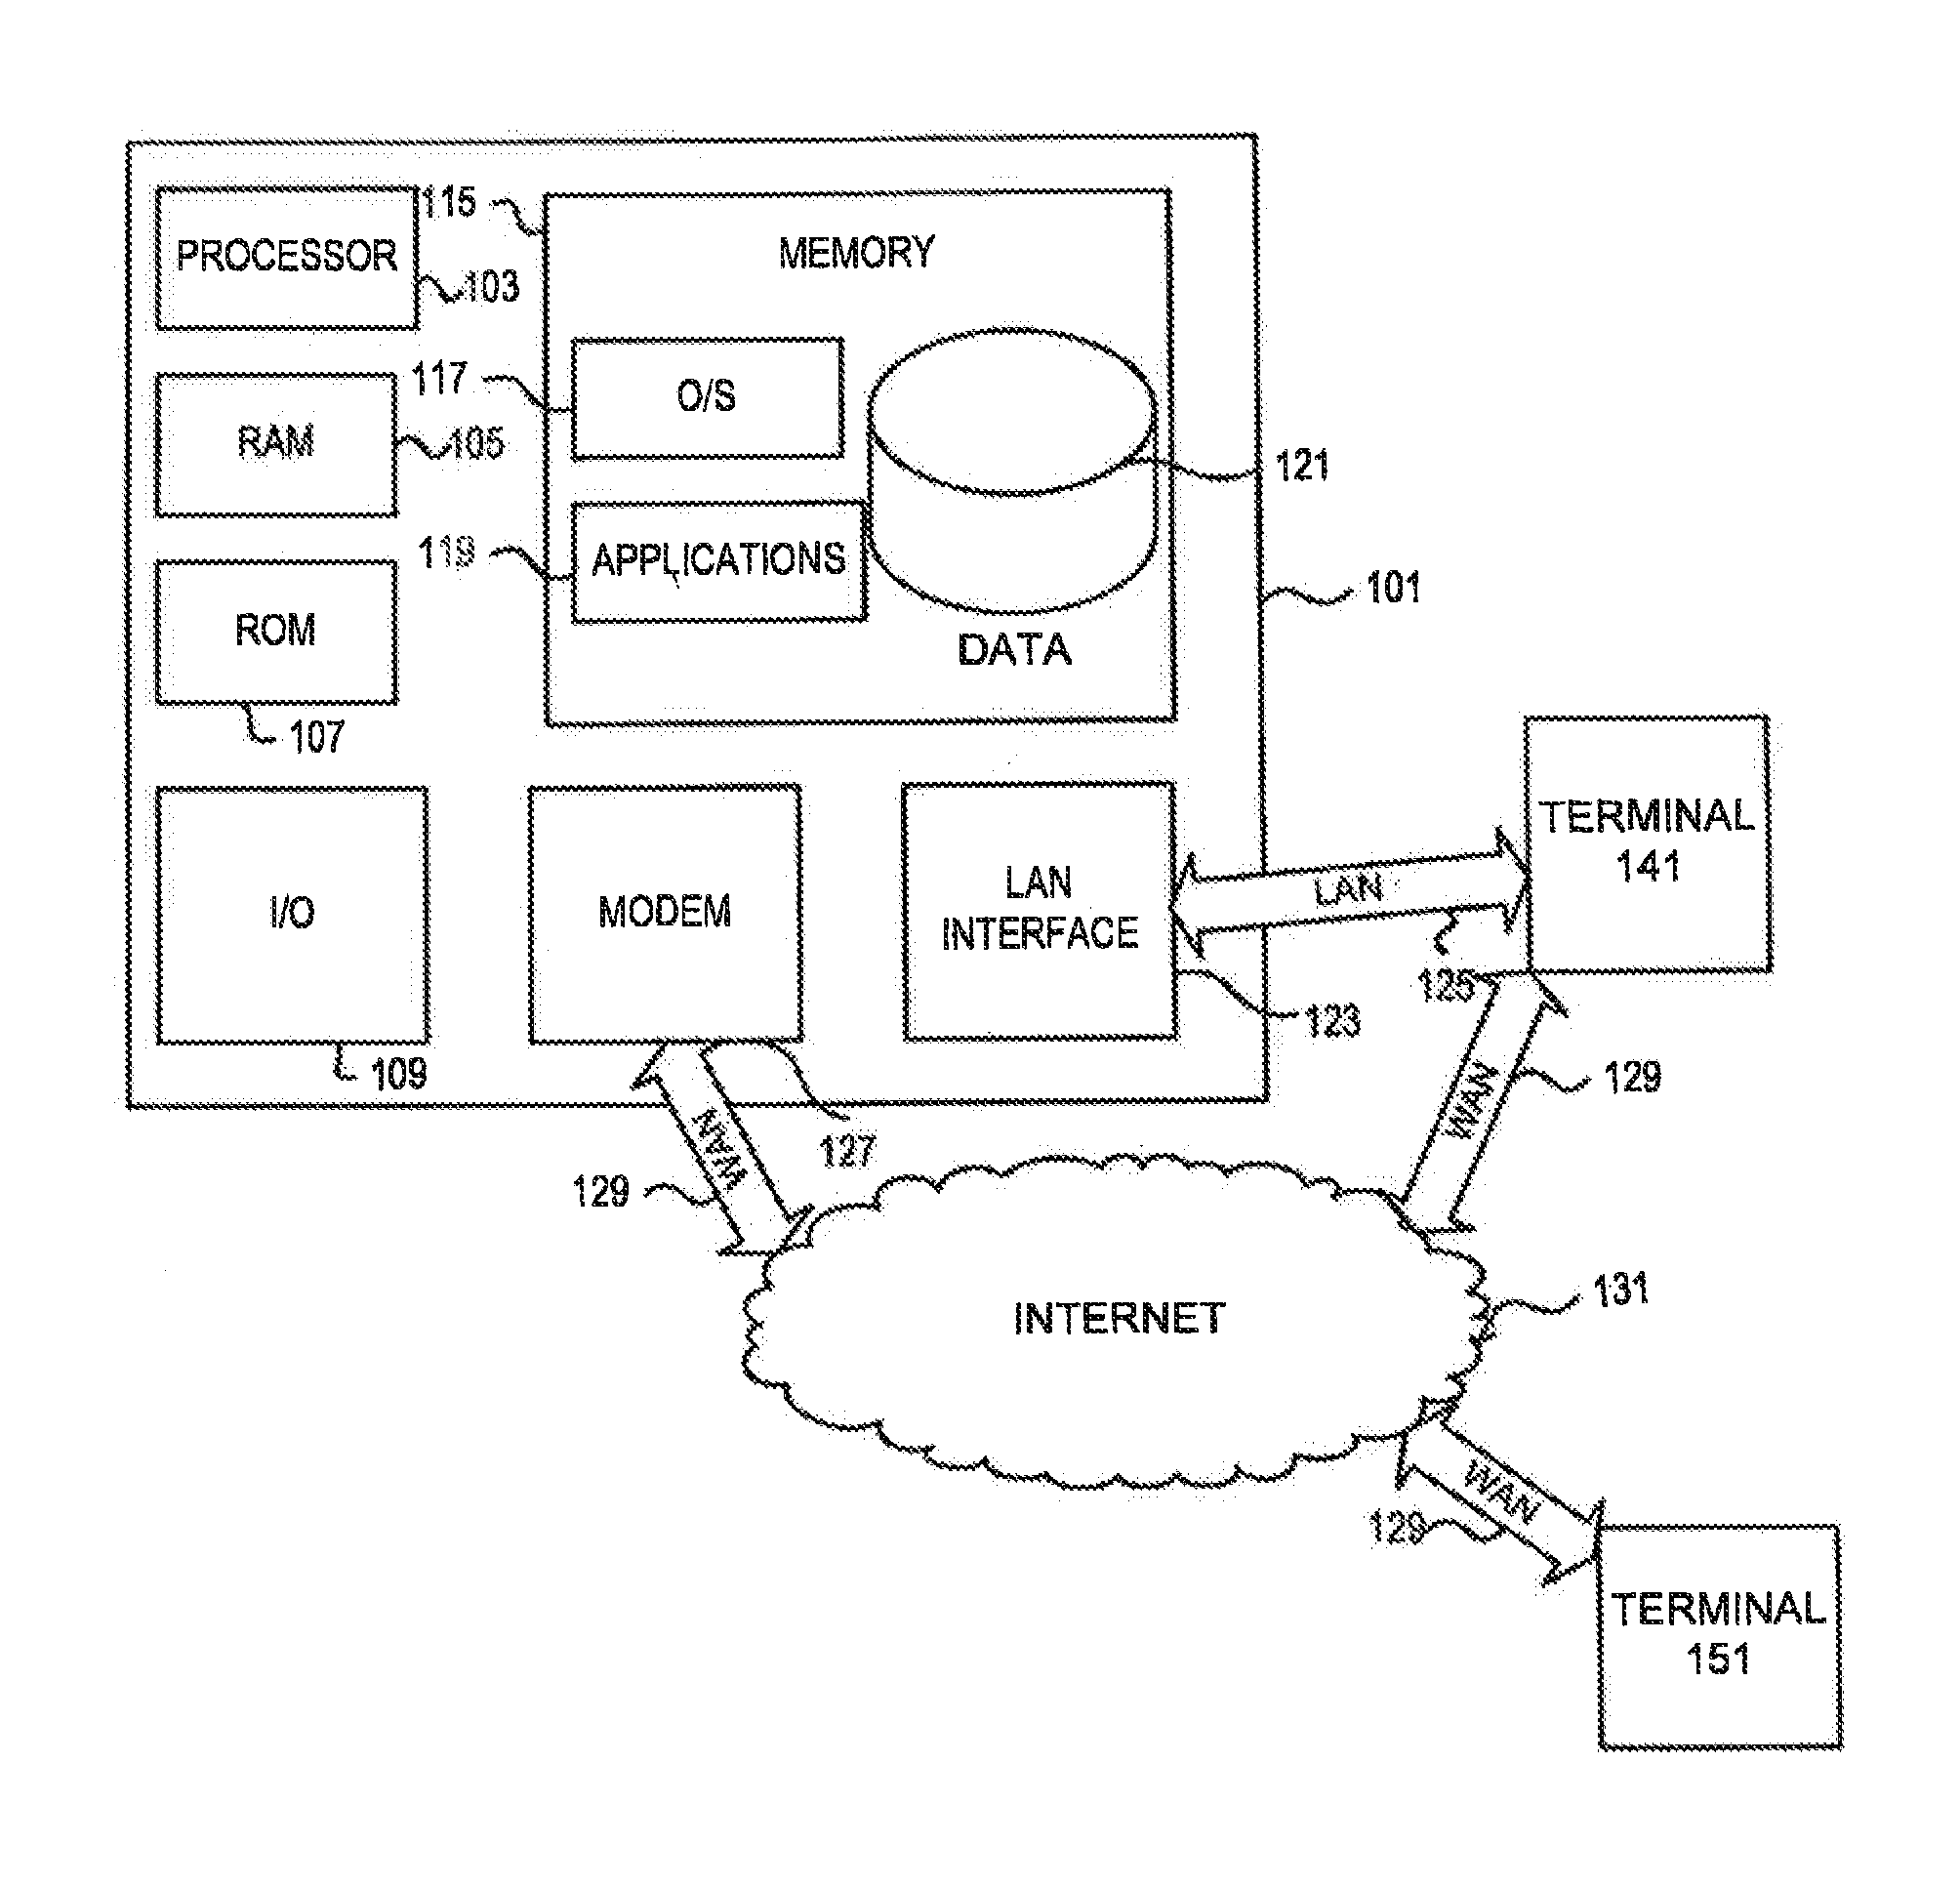 Systems and methods for generating, updating and throttling non-tradable financial instrument prices